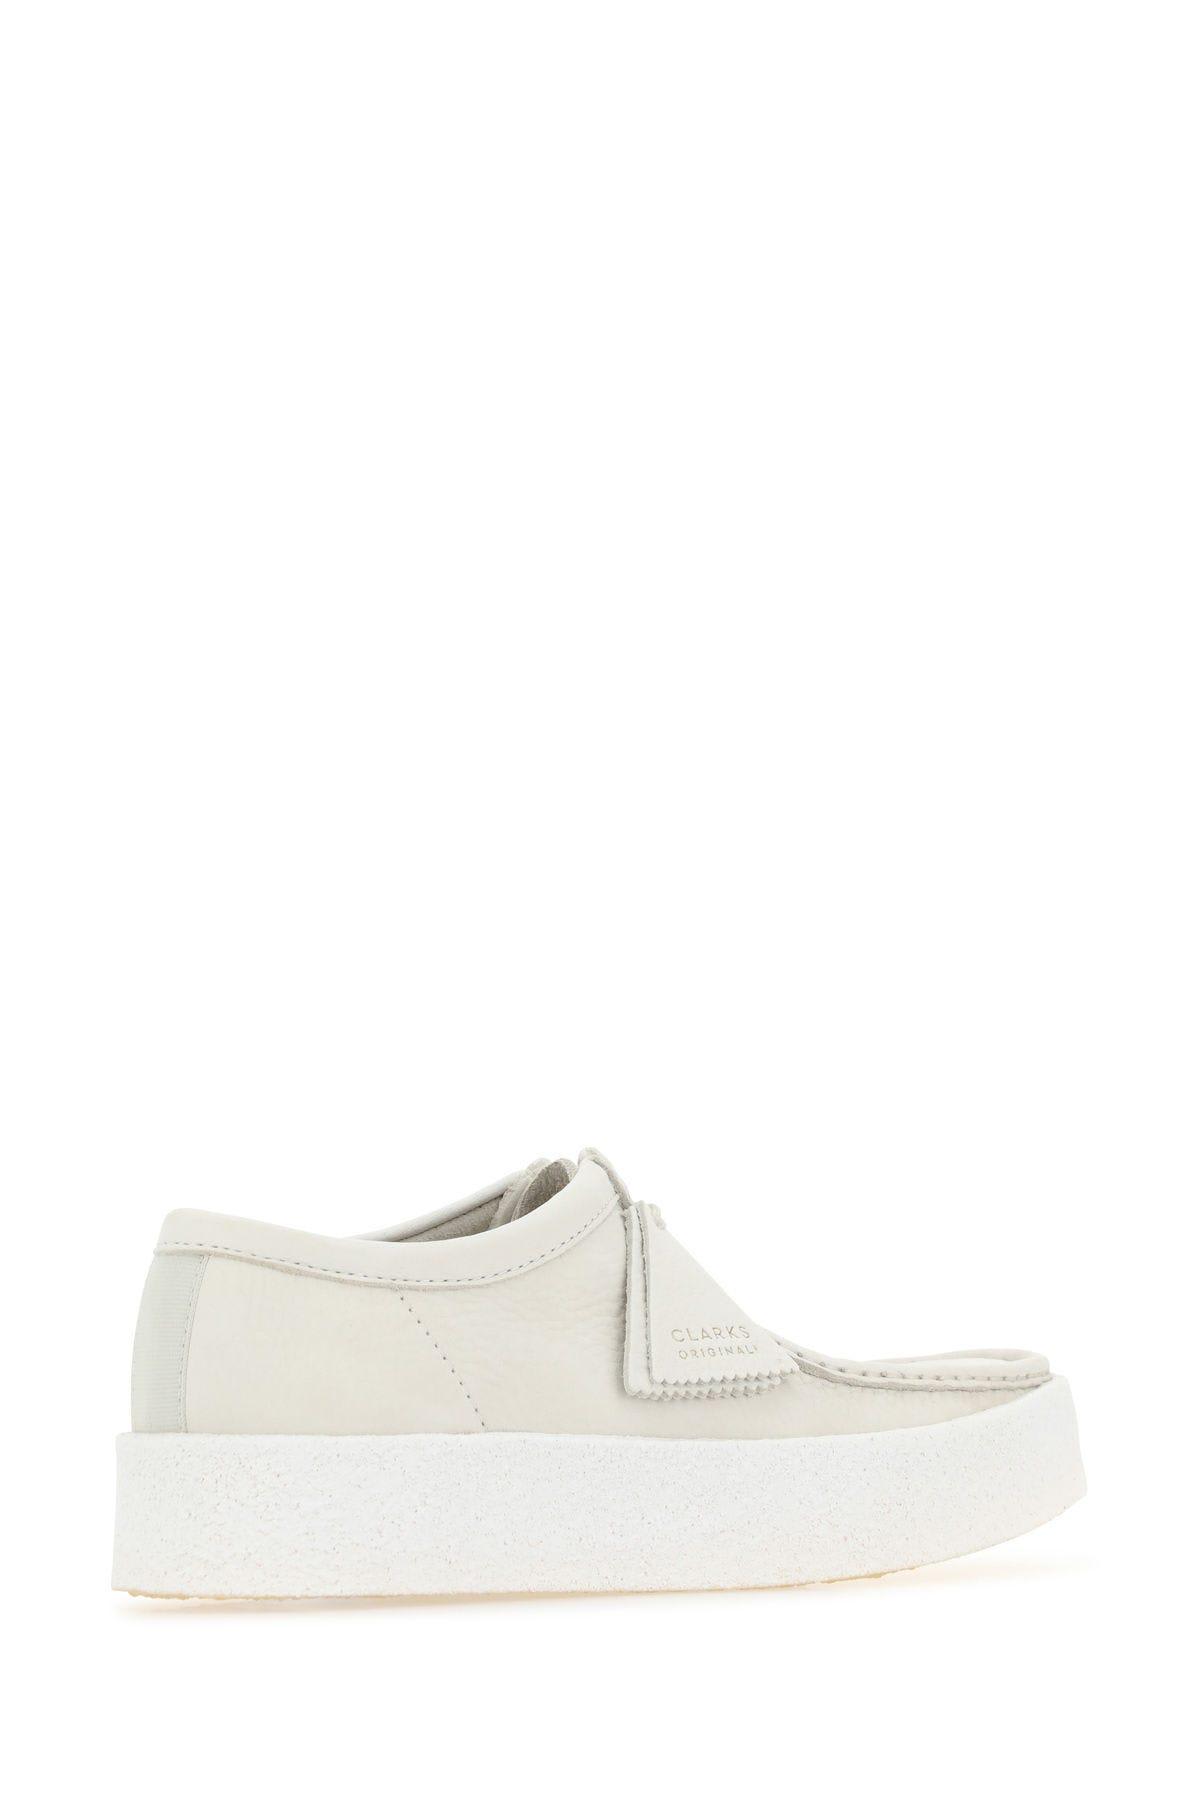 Shop Clarks Sand Nubuck Wallabee Ankle Boots In White Nubuck